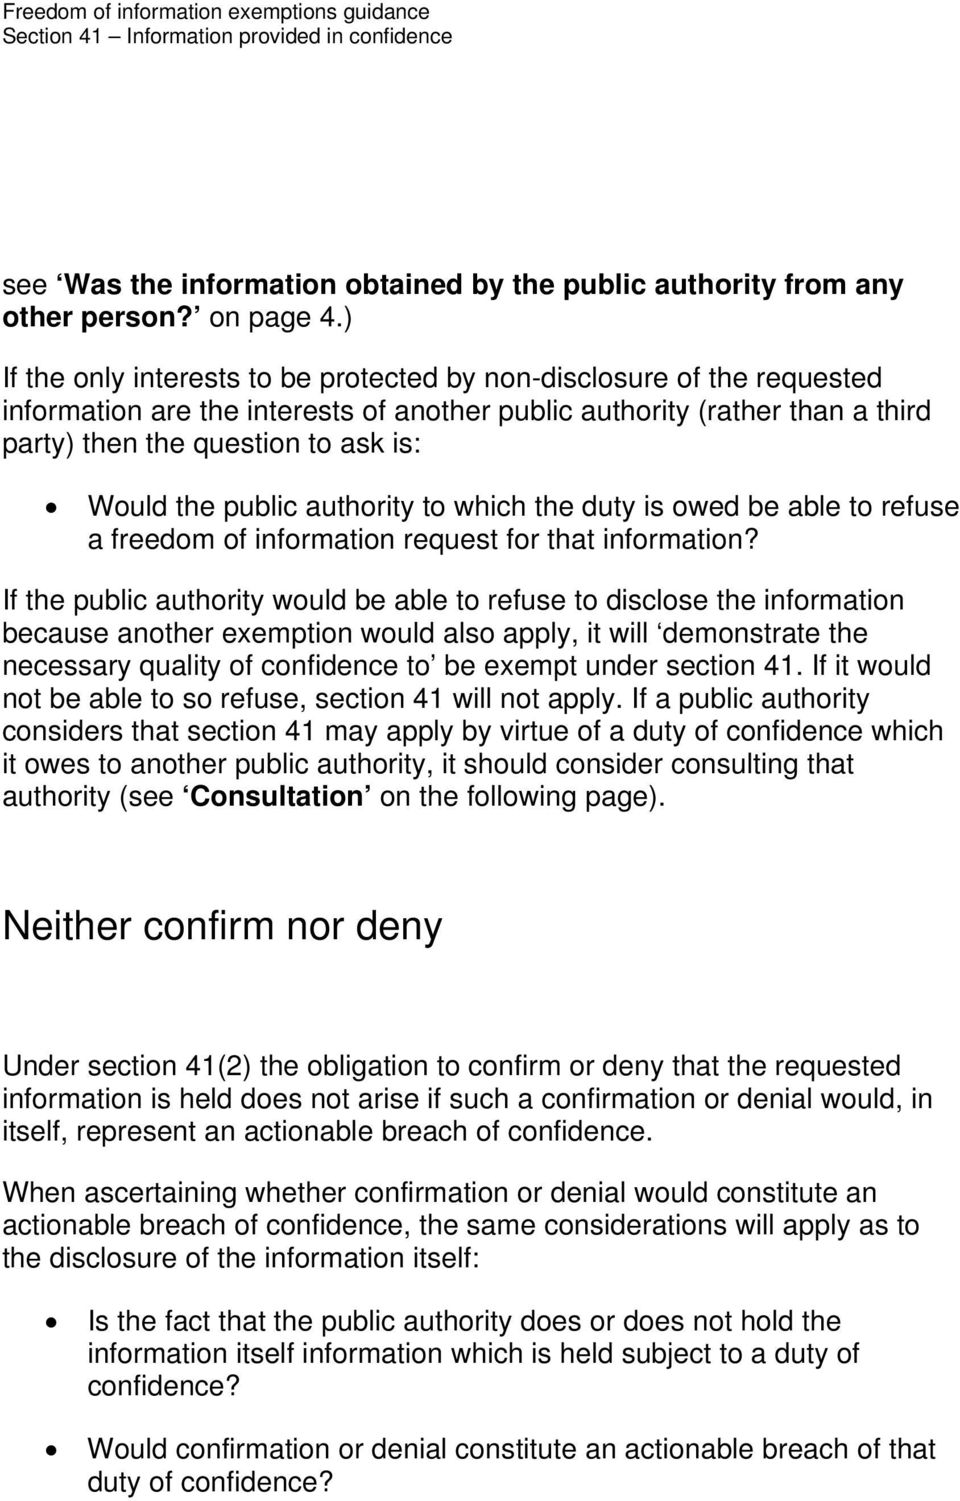 public authority to which the duty is owed be able to refuse a freedom of information request for that information?